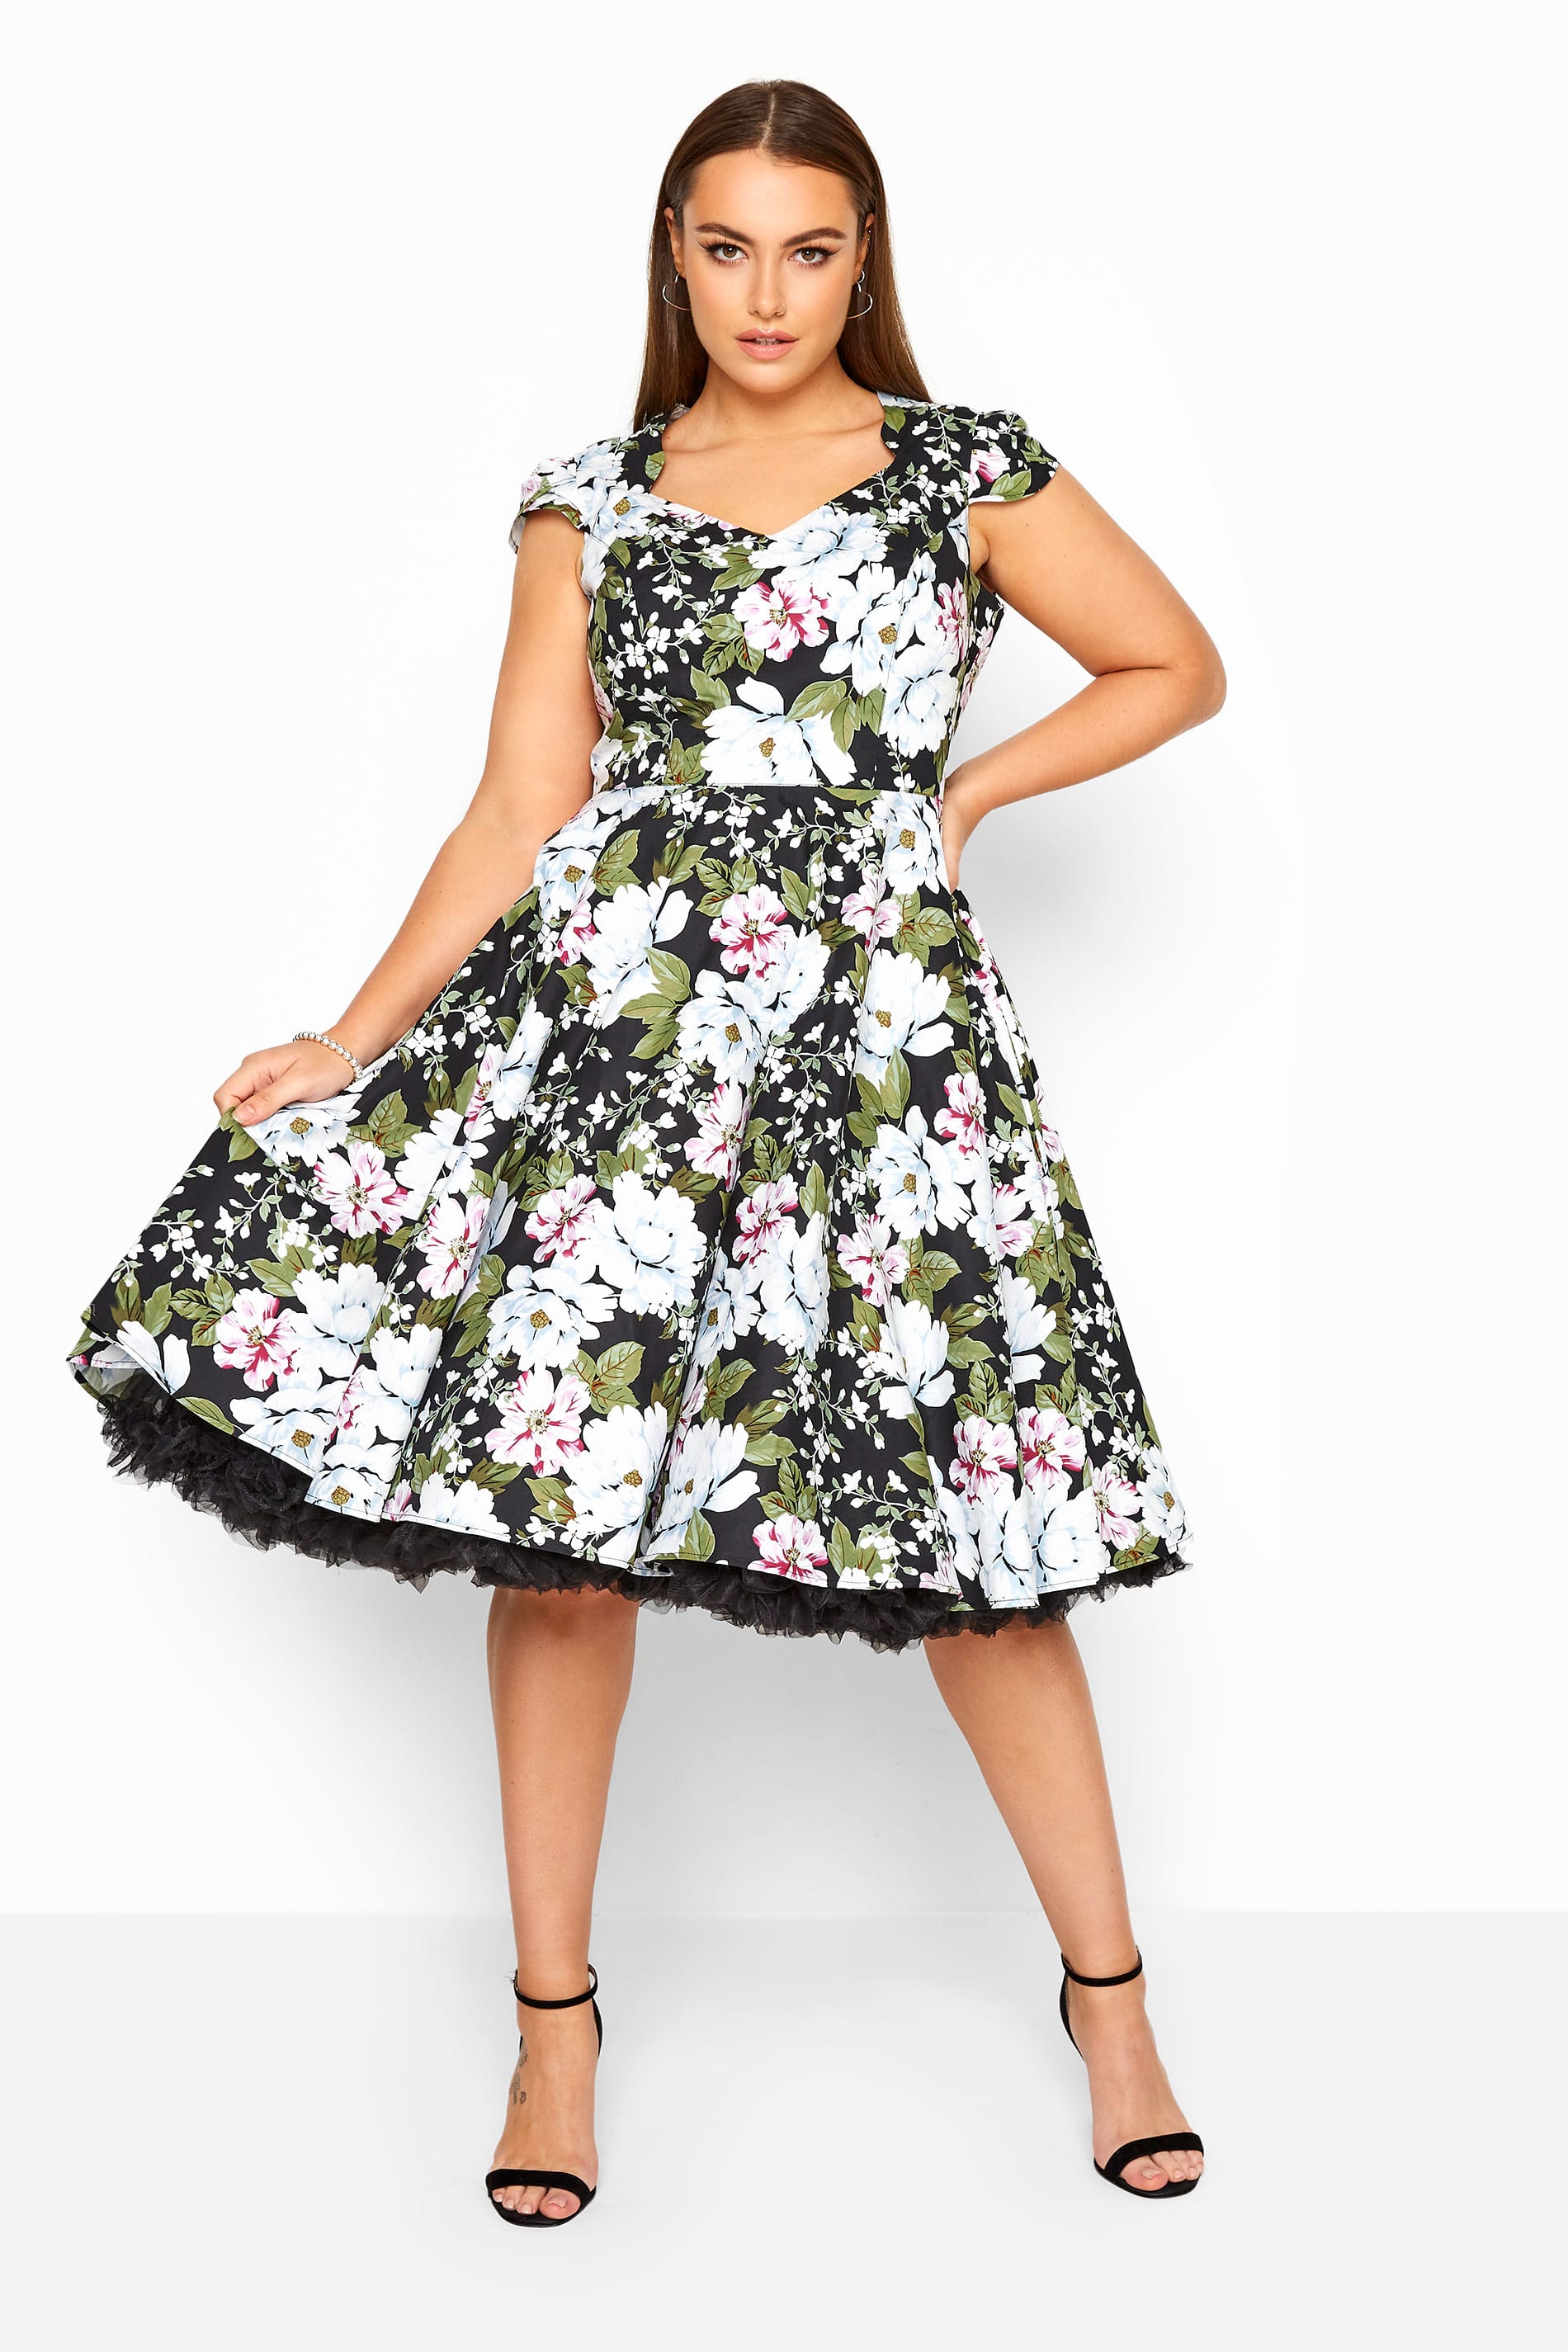 HELL BUNNY Black & White Floral Print 'Alba' Skater Dress | Yours Clothing